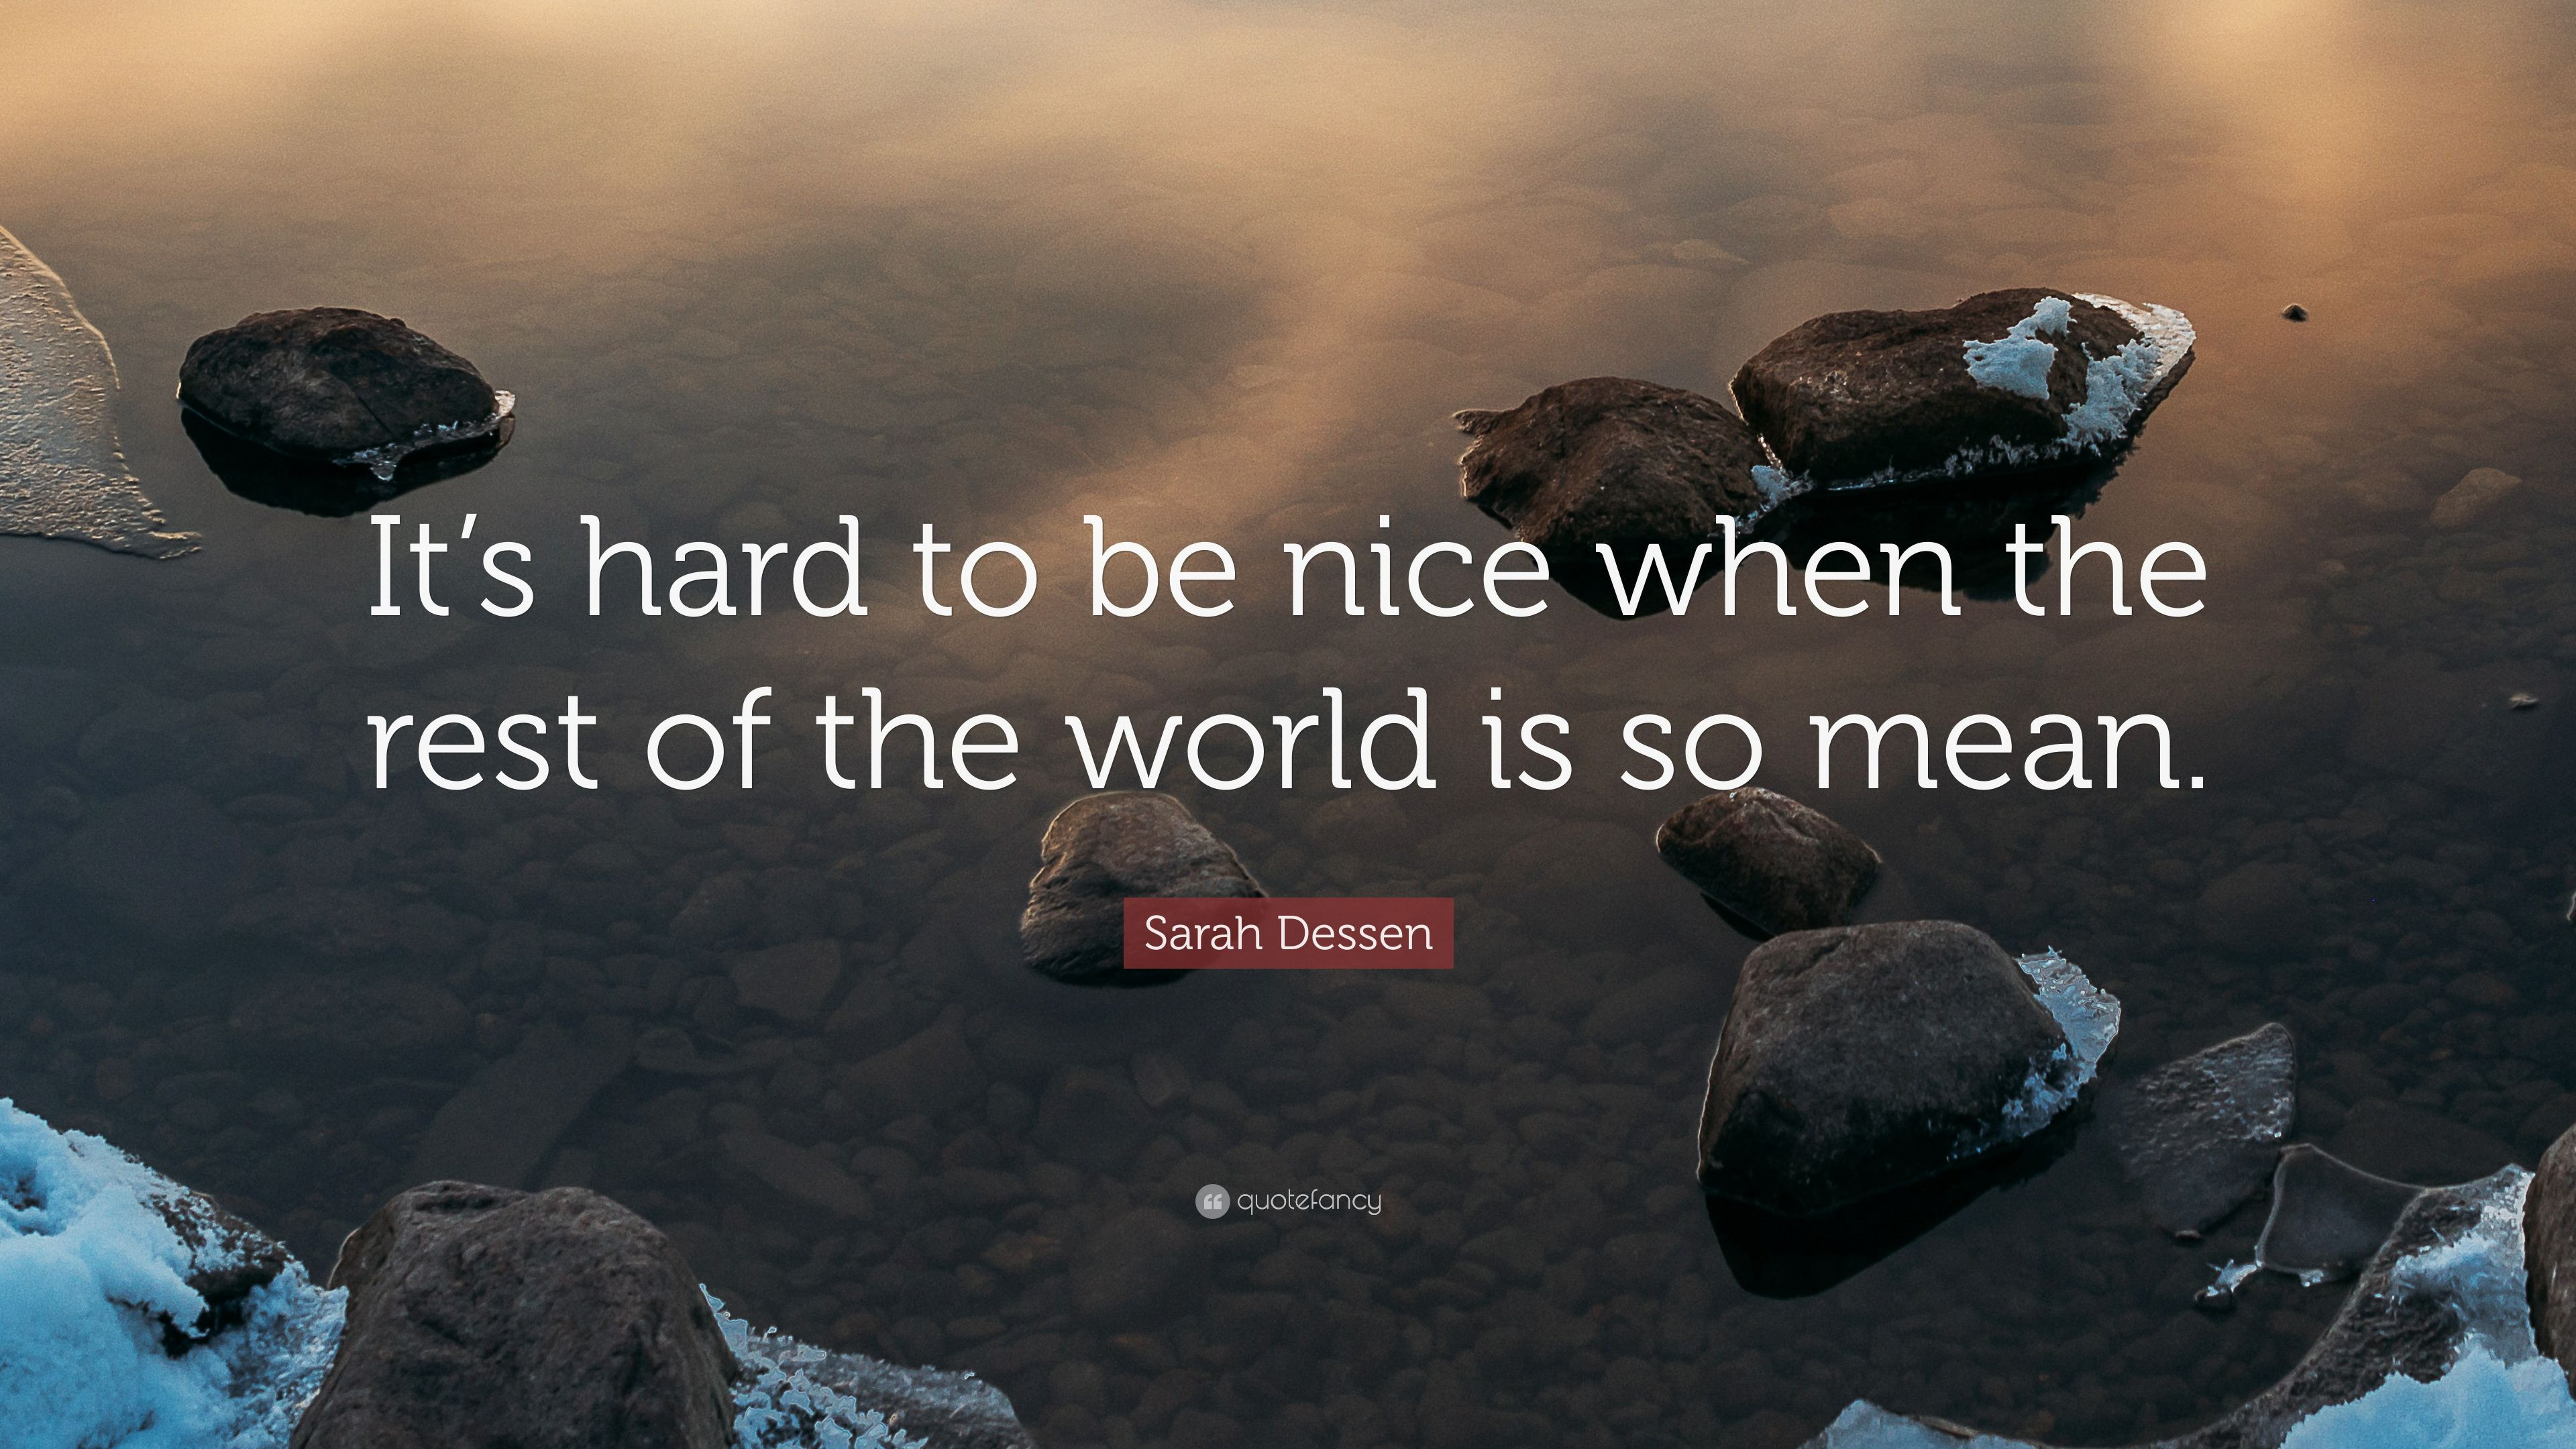 2606047-Sarah-Dessen-Quote-It-s-hard-to-be-nice-when-the-rest-of-the-world.jpg